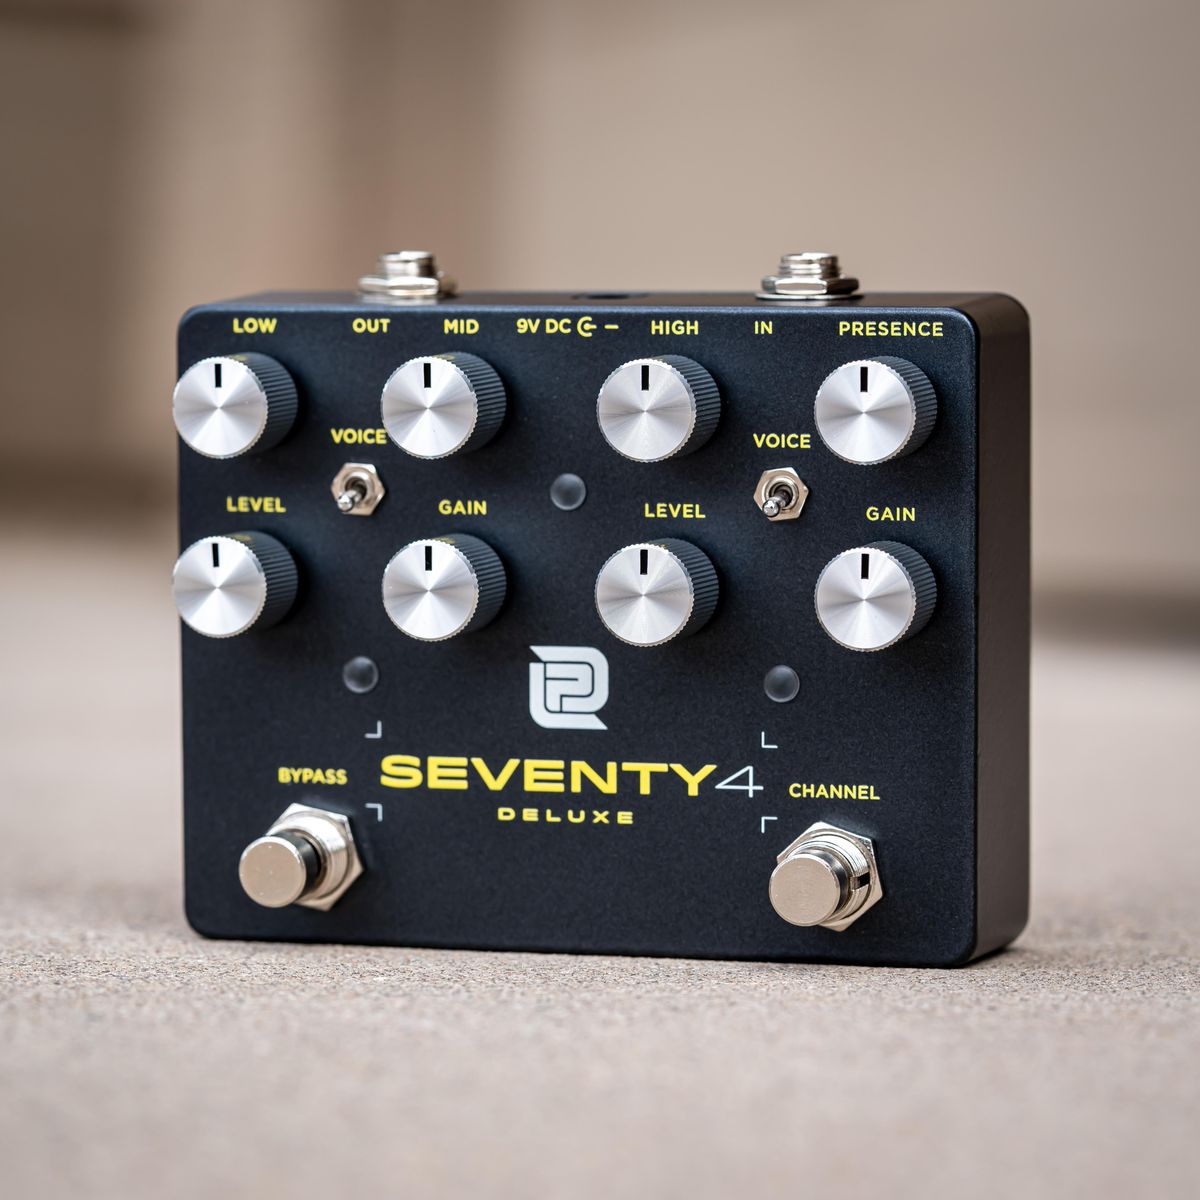 LPD Pedals Releases the Seventy4 Deluxe